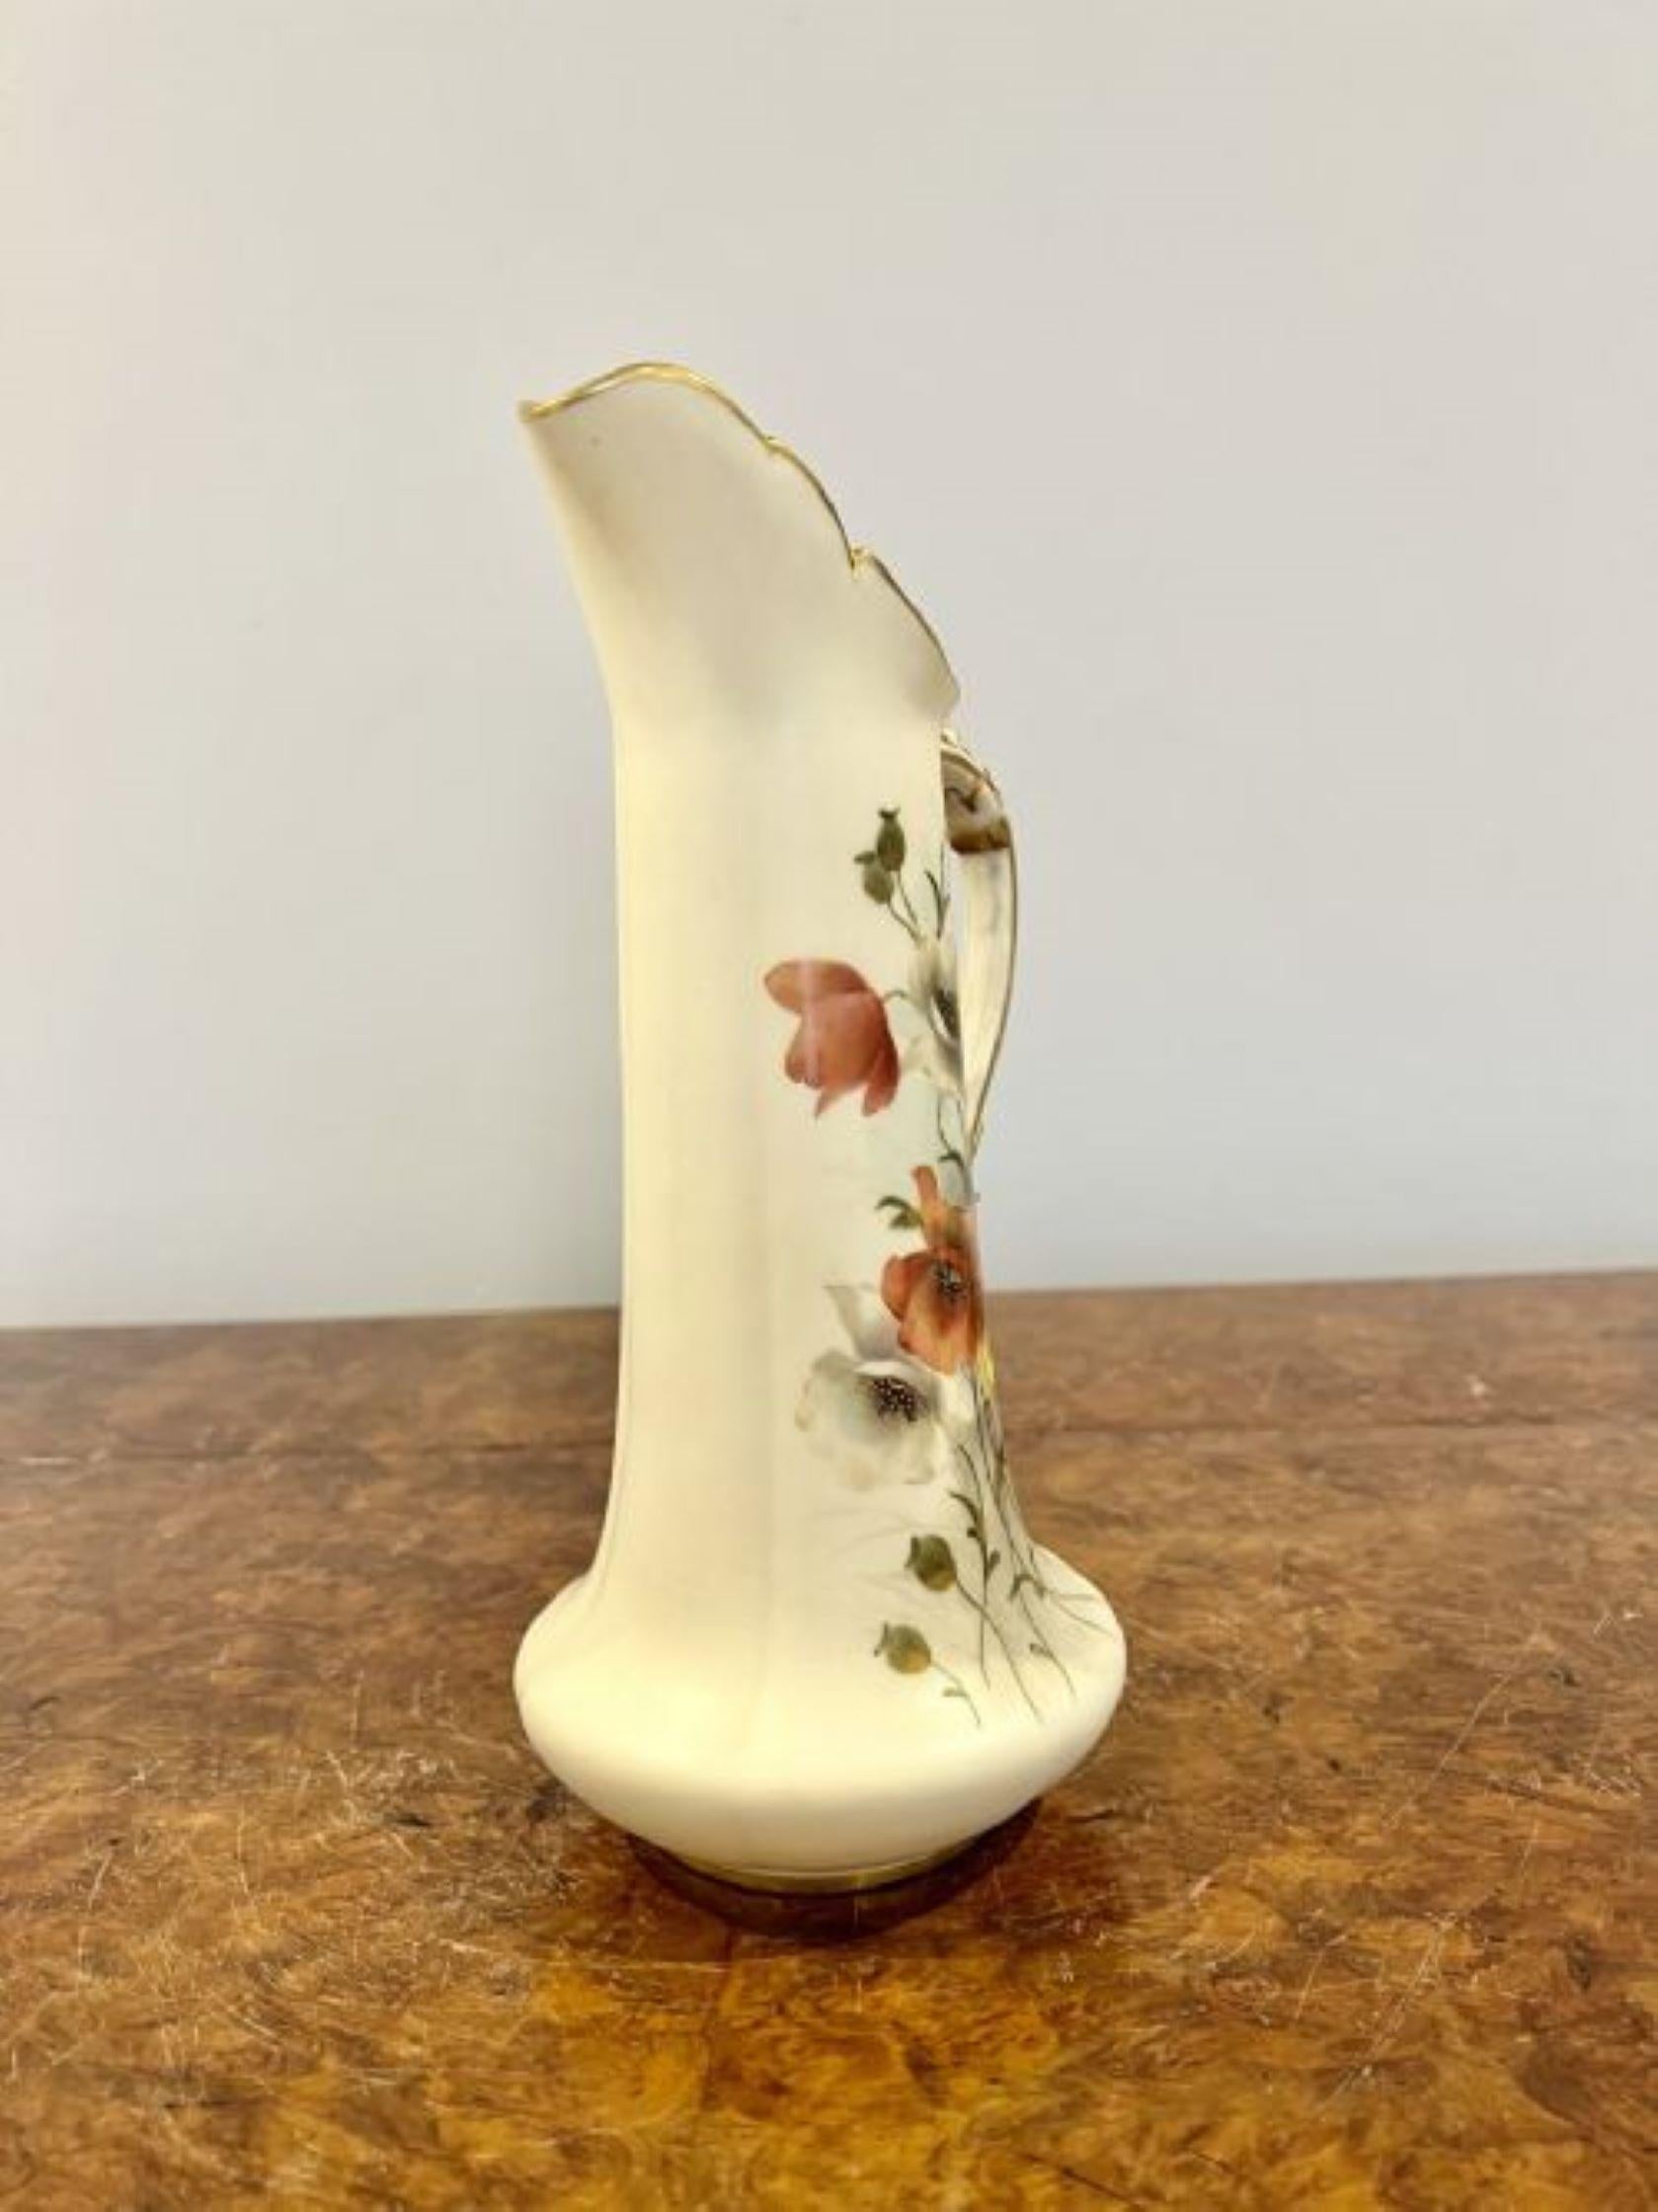 Fine quality antique Royal Worcester jug having a quality hand painted and gilded Royal Worcester jug with a lovely shaped gilded handle and a hand painted jug in wonderful red, yellow, gold and green colours decorated with flowers and leaves.